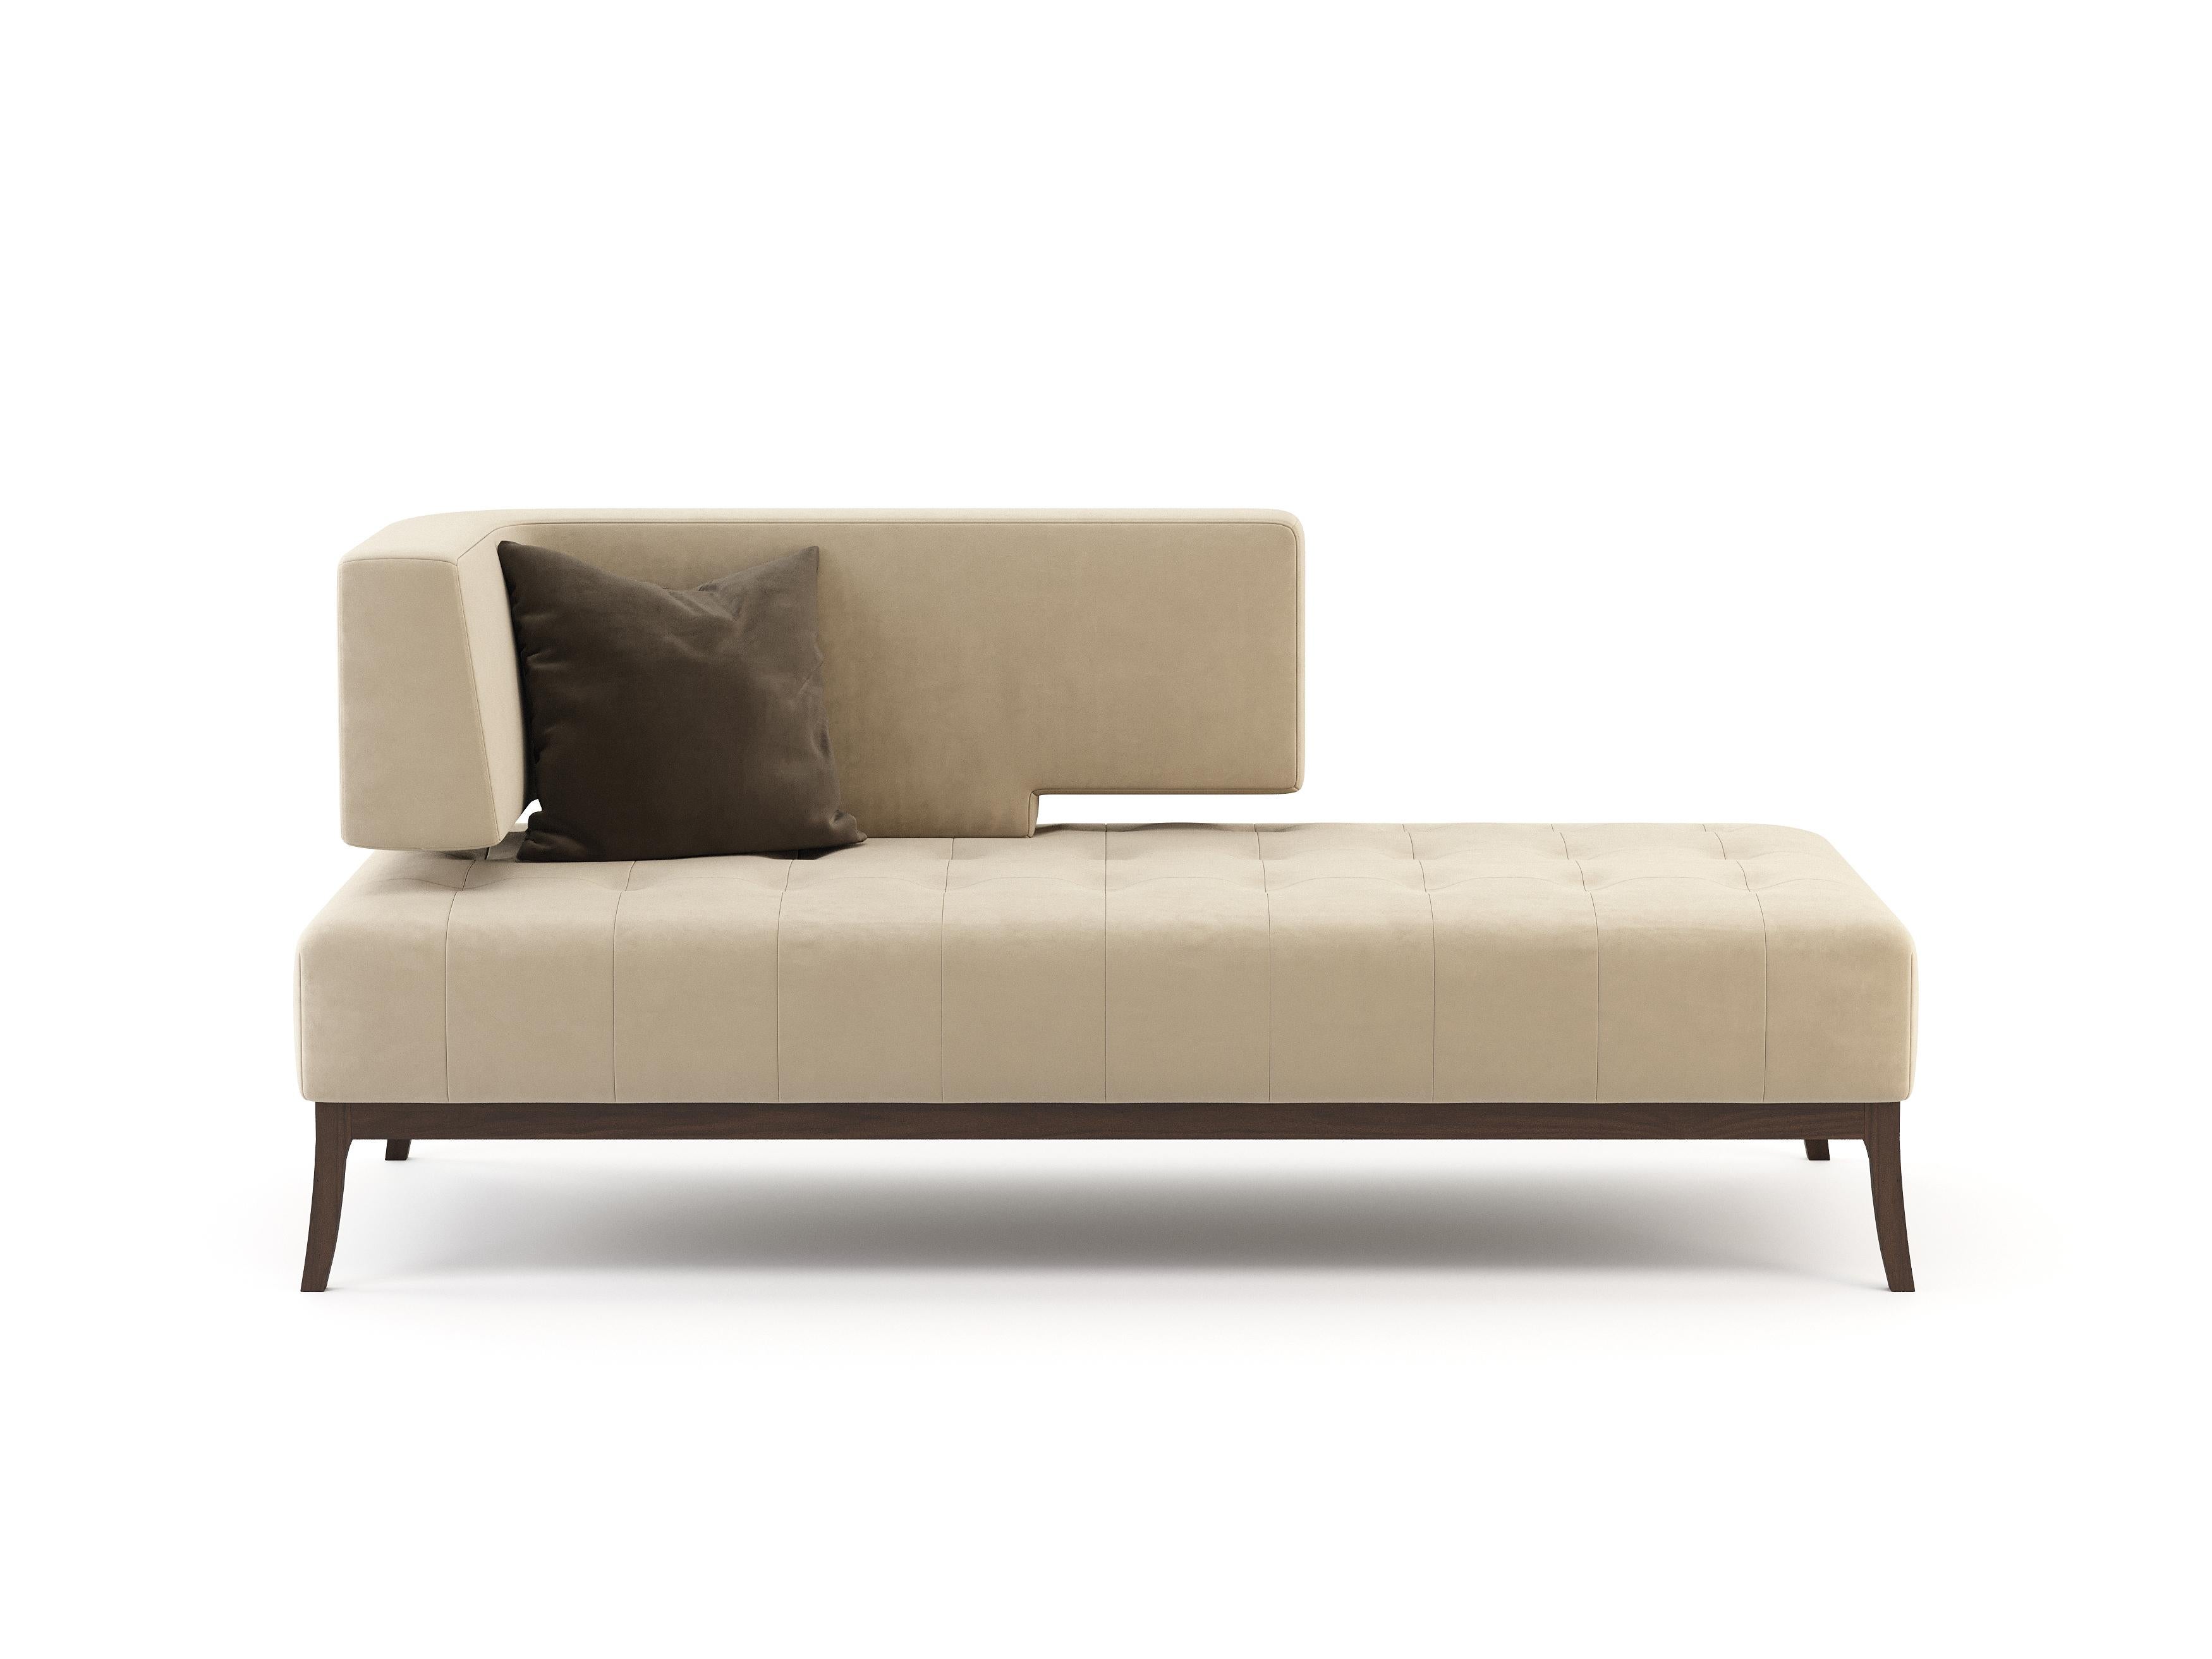 The Passione collection reflects the feminine elegance of the rounded forms of its pieces. Each design piece is essential to complete the space in a framework of perfect sophistication.

Upholstered in beige velvet and with walnut wood base, the